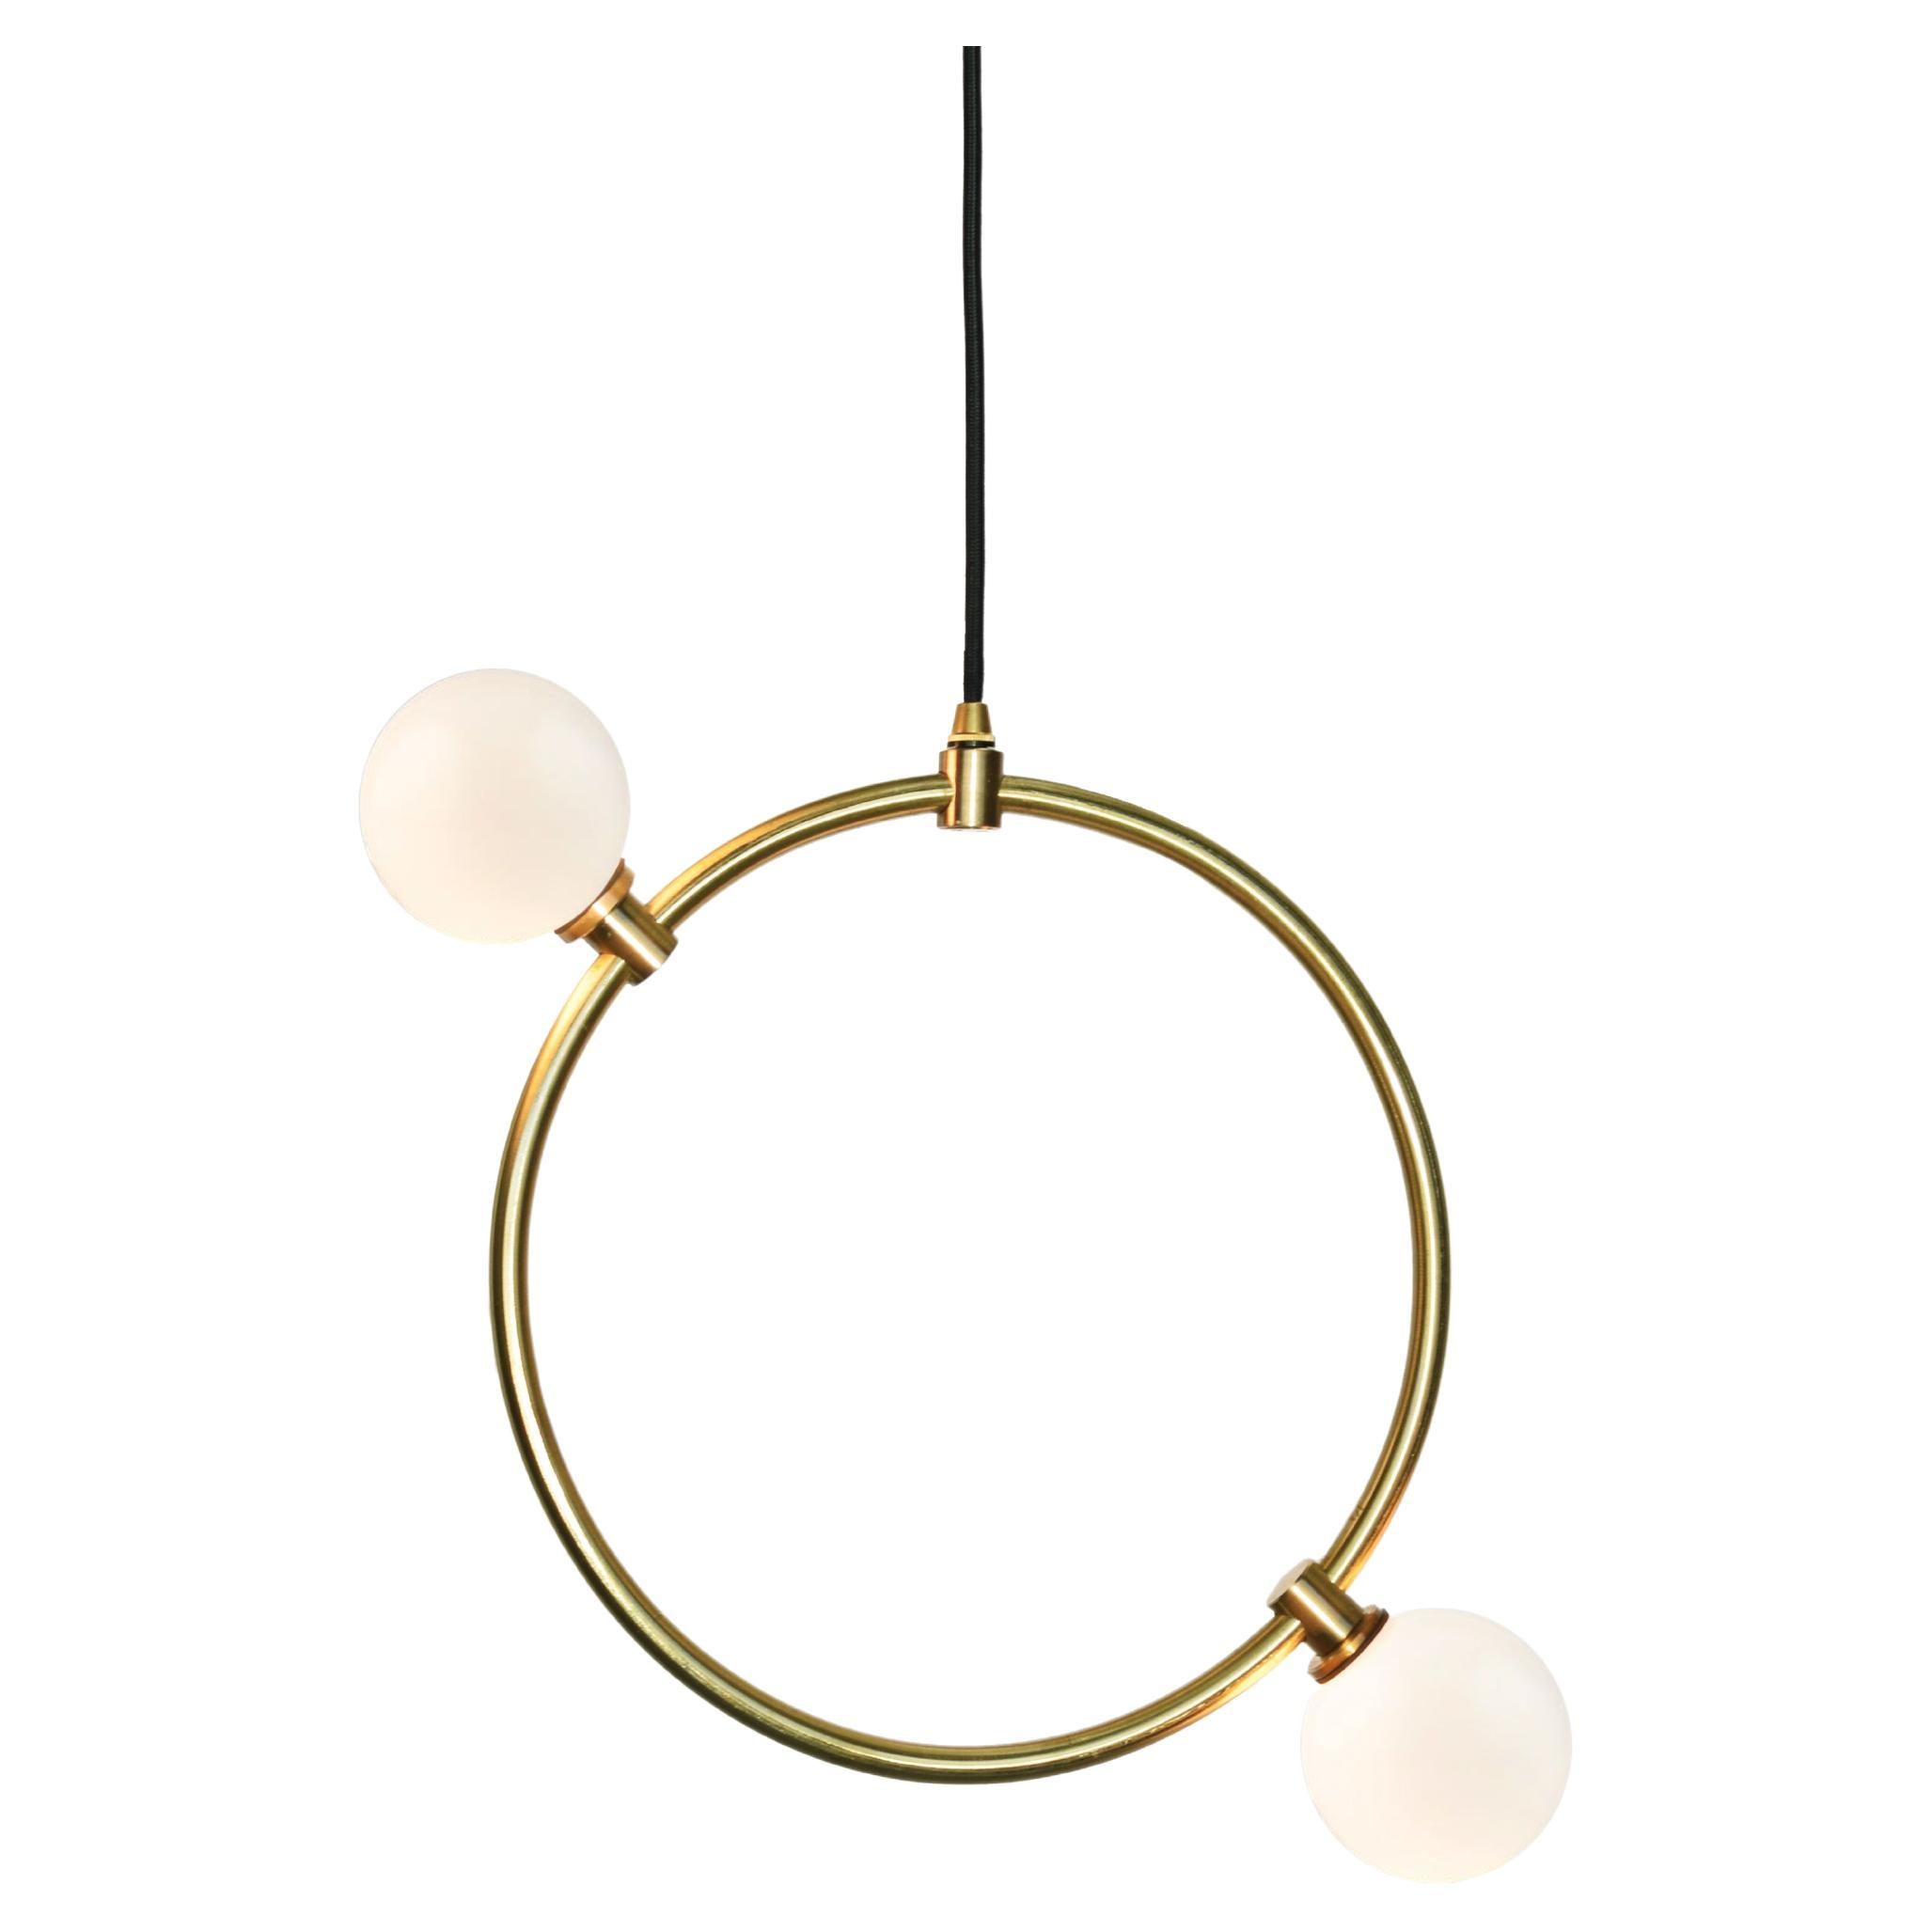 'Drops Pendant Large' by Marc Wood. Handmade Brass Ring Lamps, Opal Glass Shades For Sale